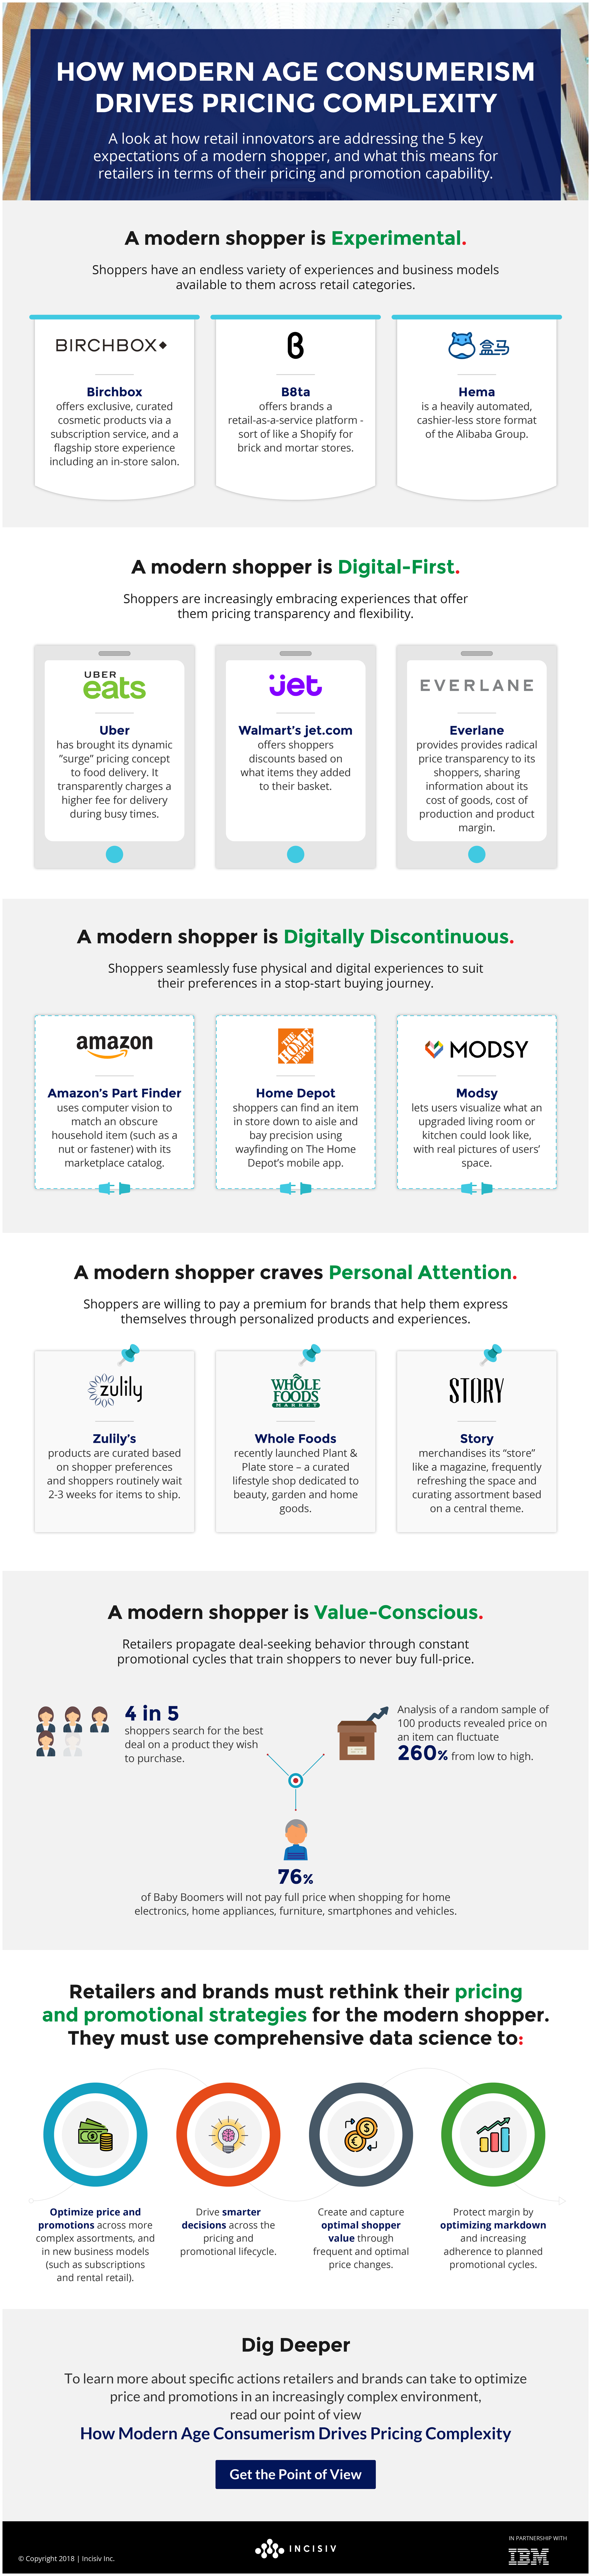 How Modern Age Consumerism Drives pricing Complexity, Infographic